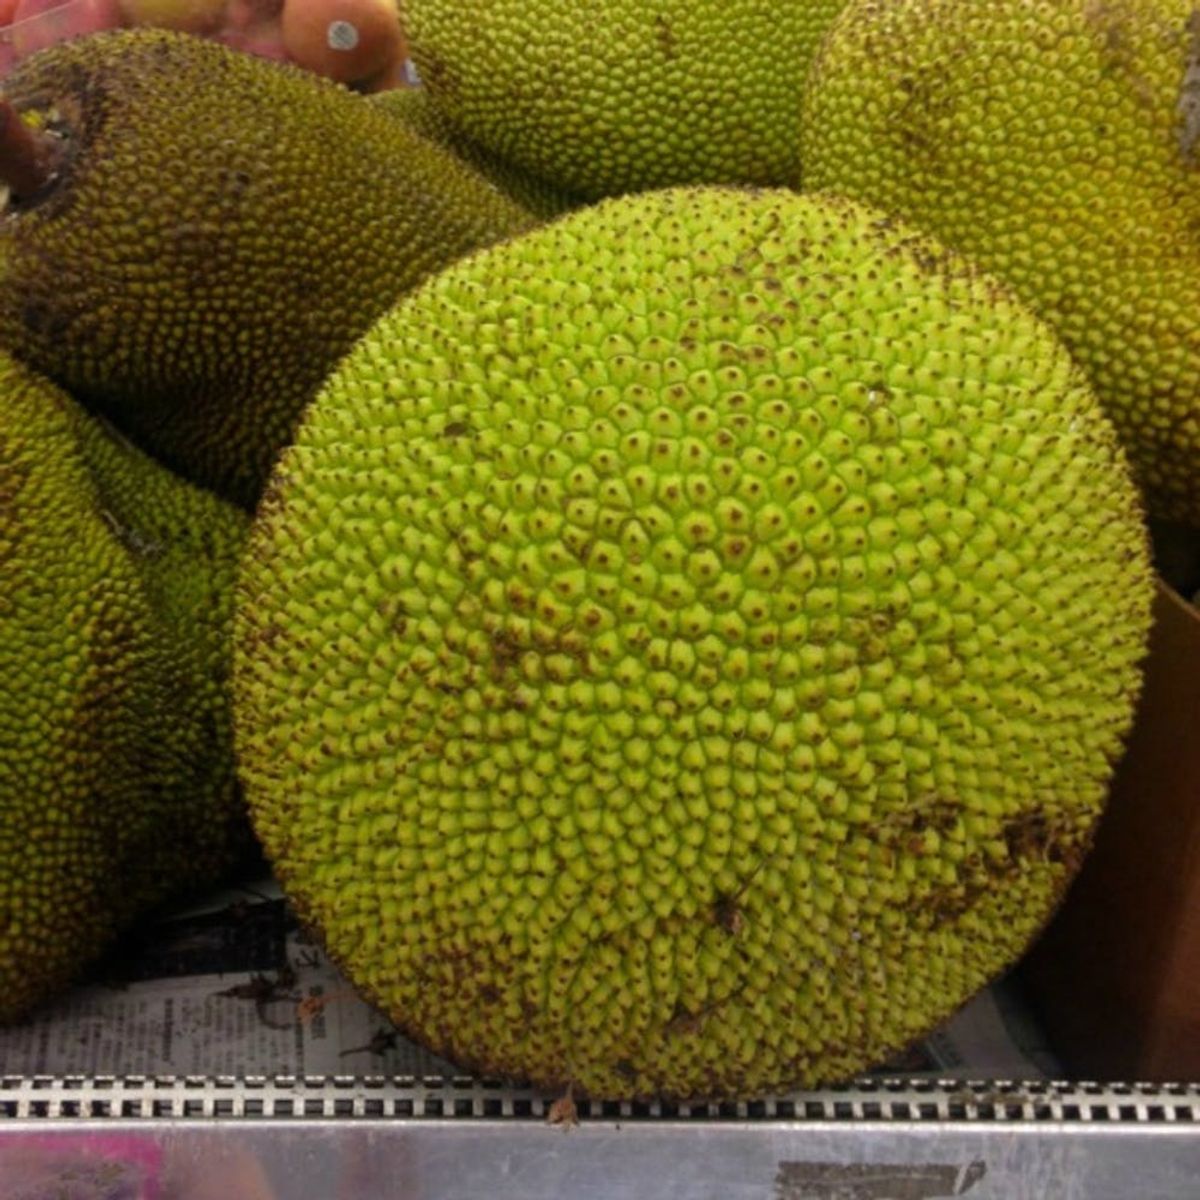 How to Prepare and Cook Jackfruit, the Latest Vegan Food Trend